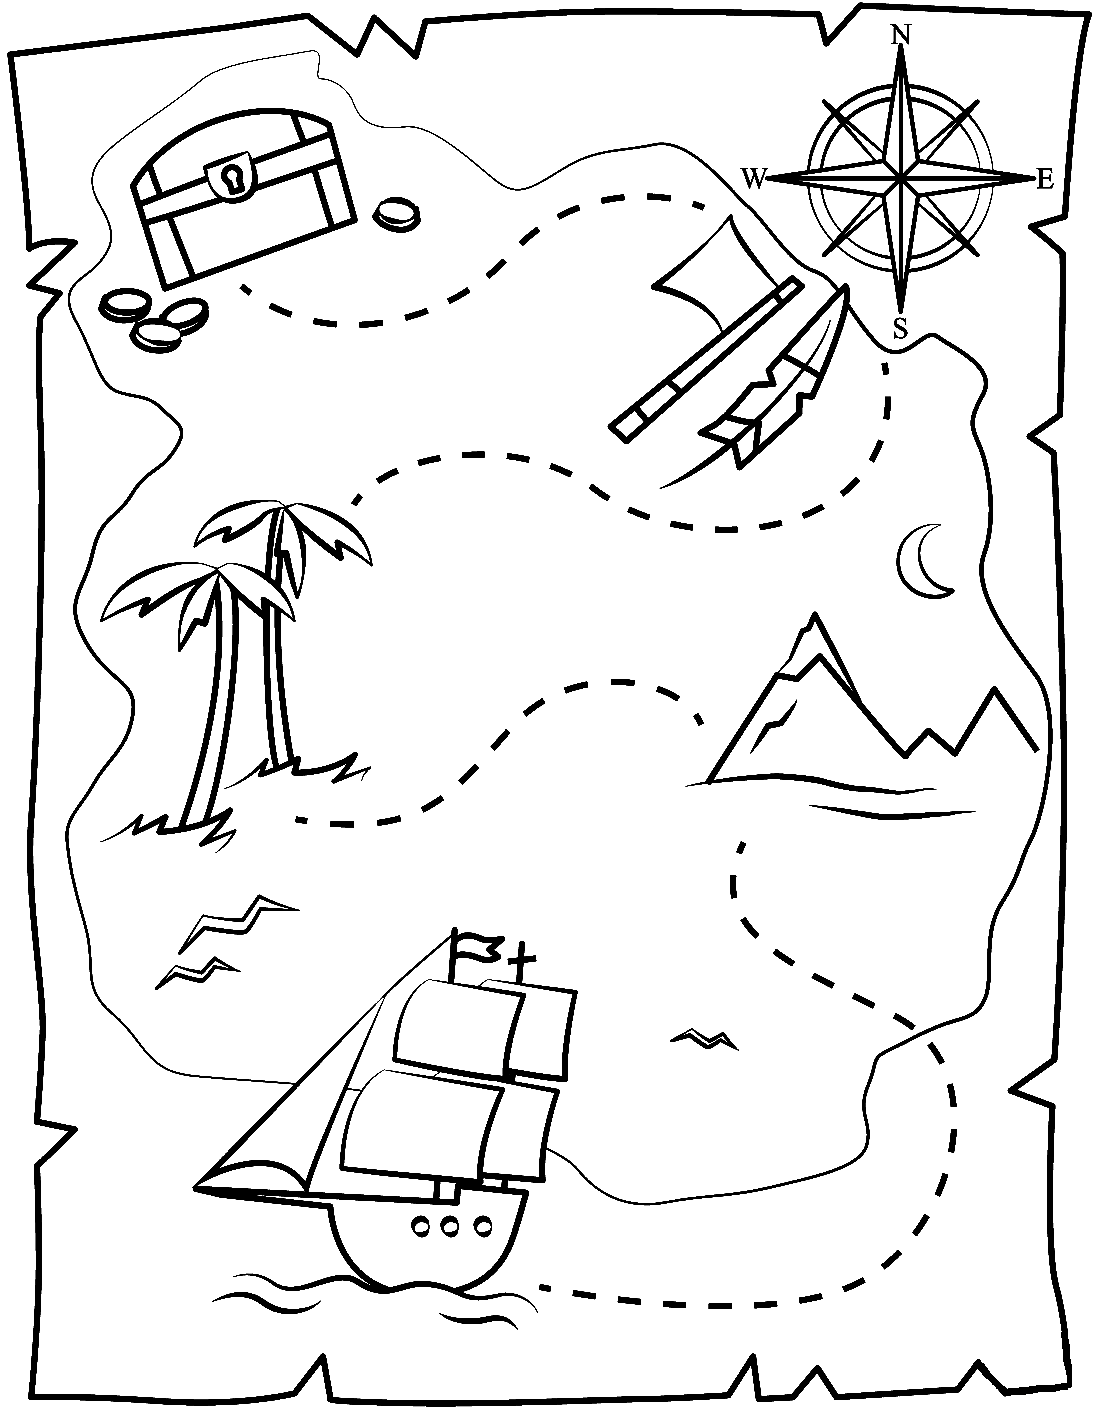 Treasure Chest Map Coloring Pages